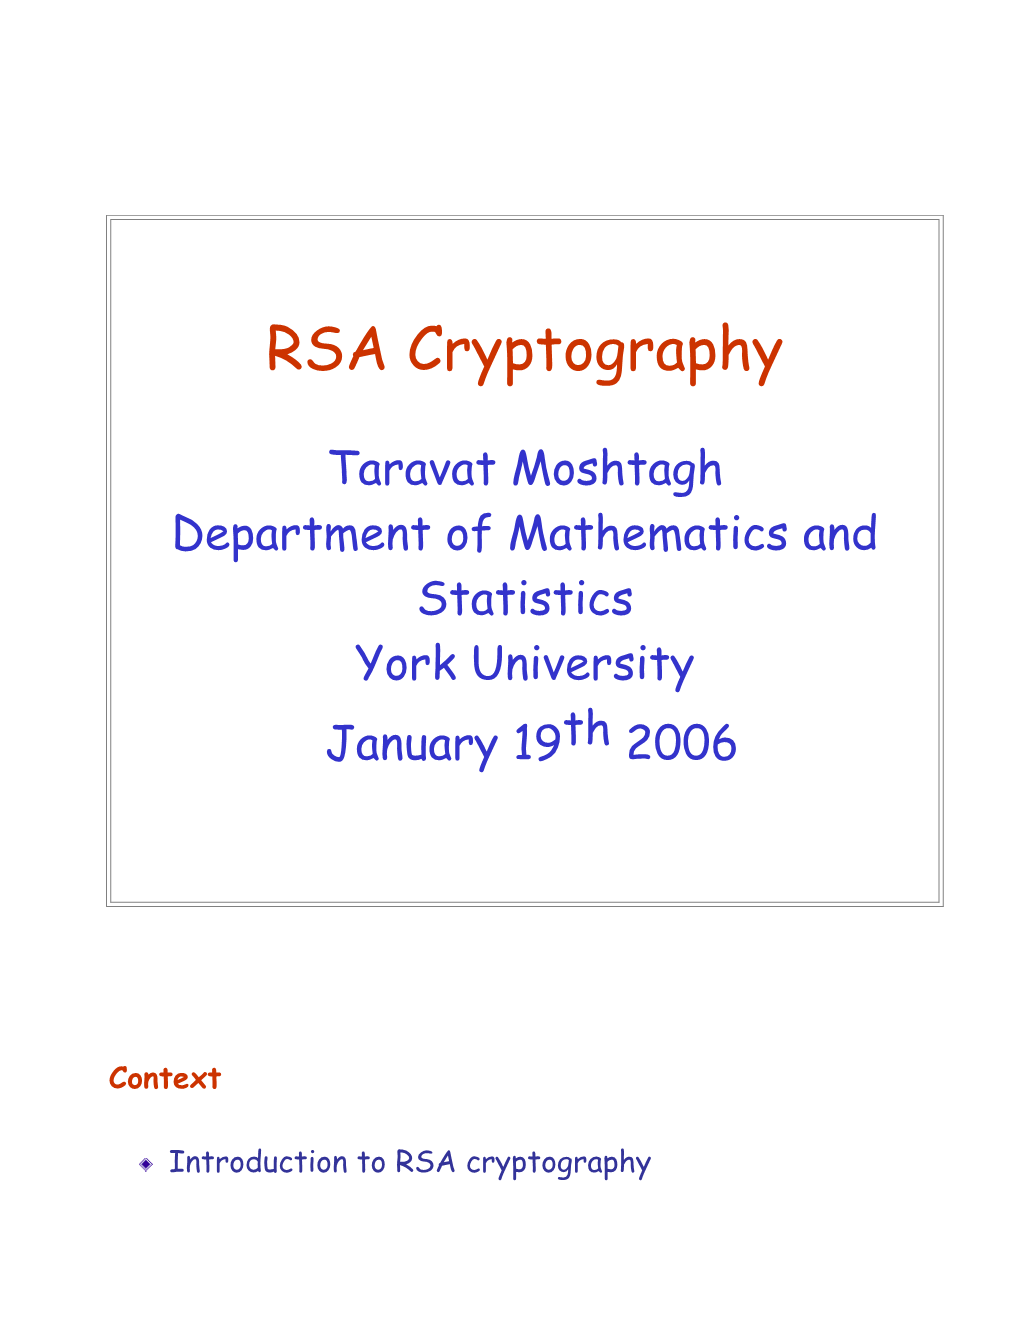 Introduction to RSA Cryptography